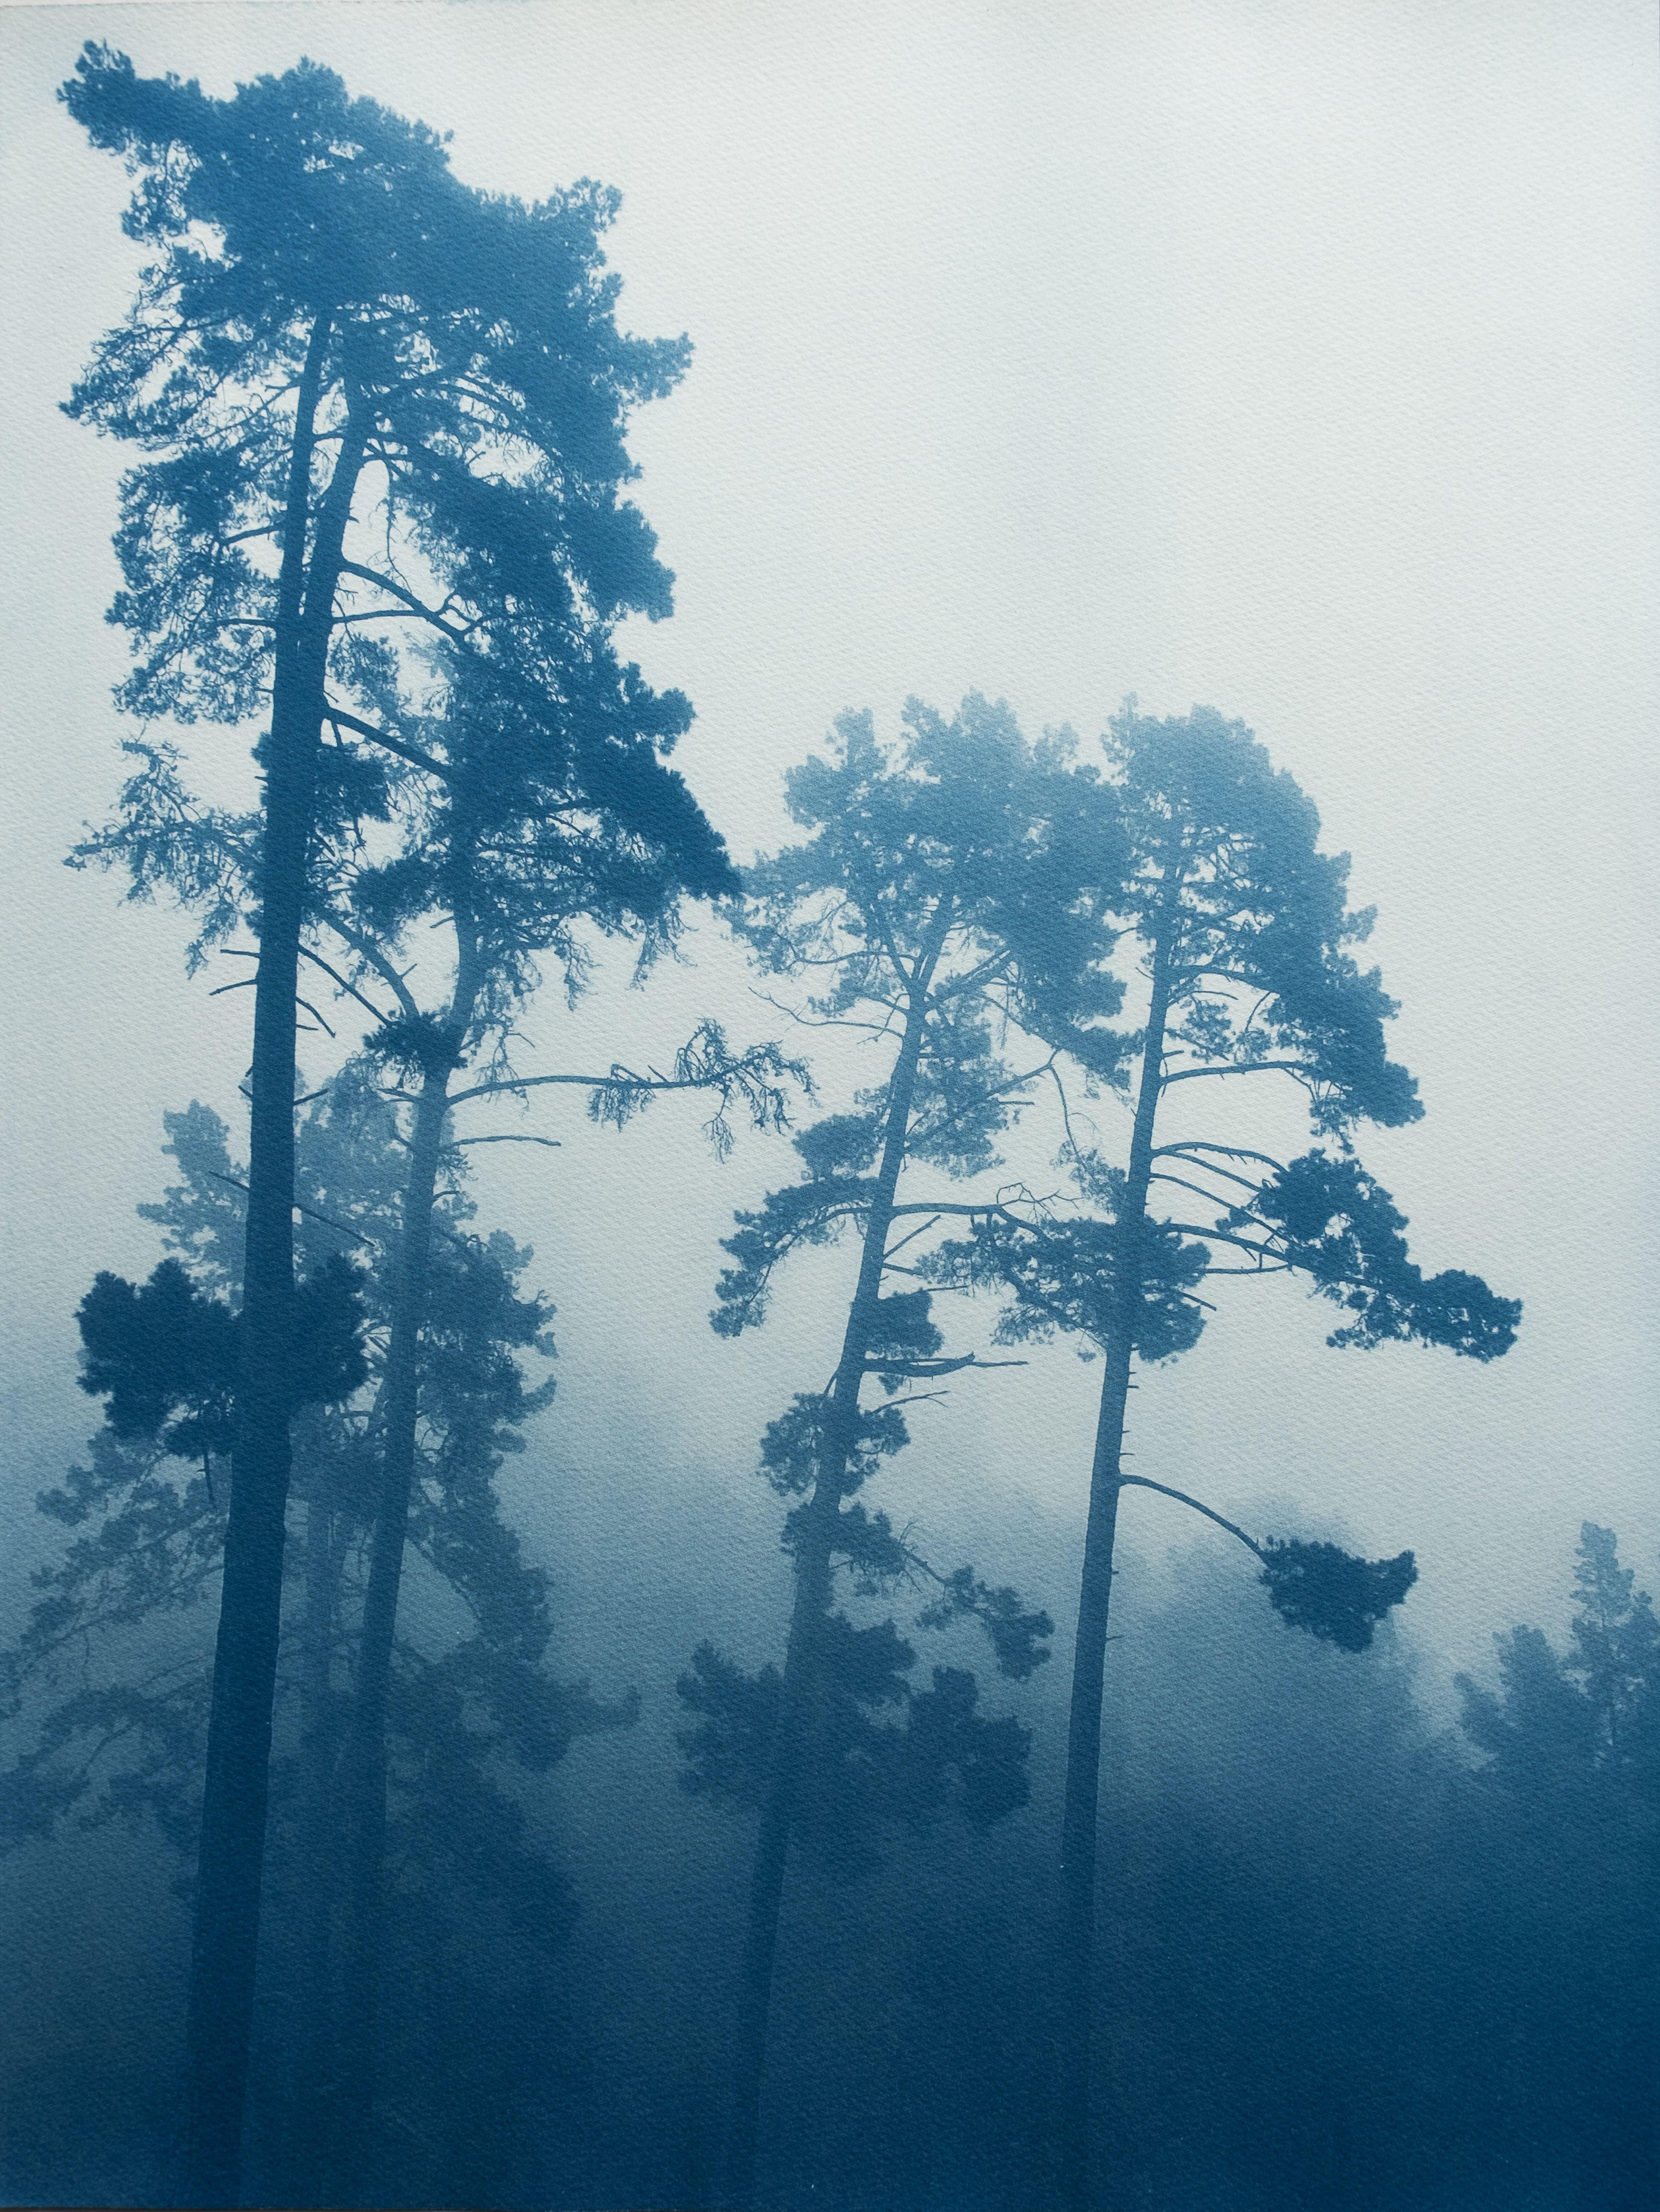 Christine So Landscape Photograph - Foggy Morning Pines (Hand-Printed original cyanotype, 24 x 18 inches)